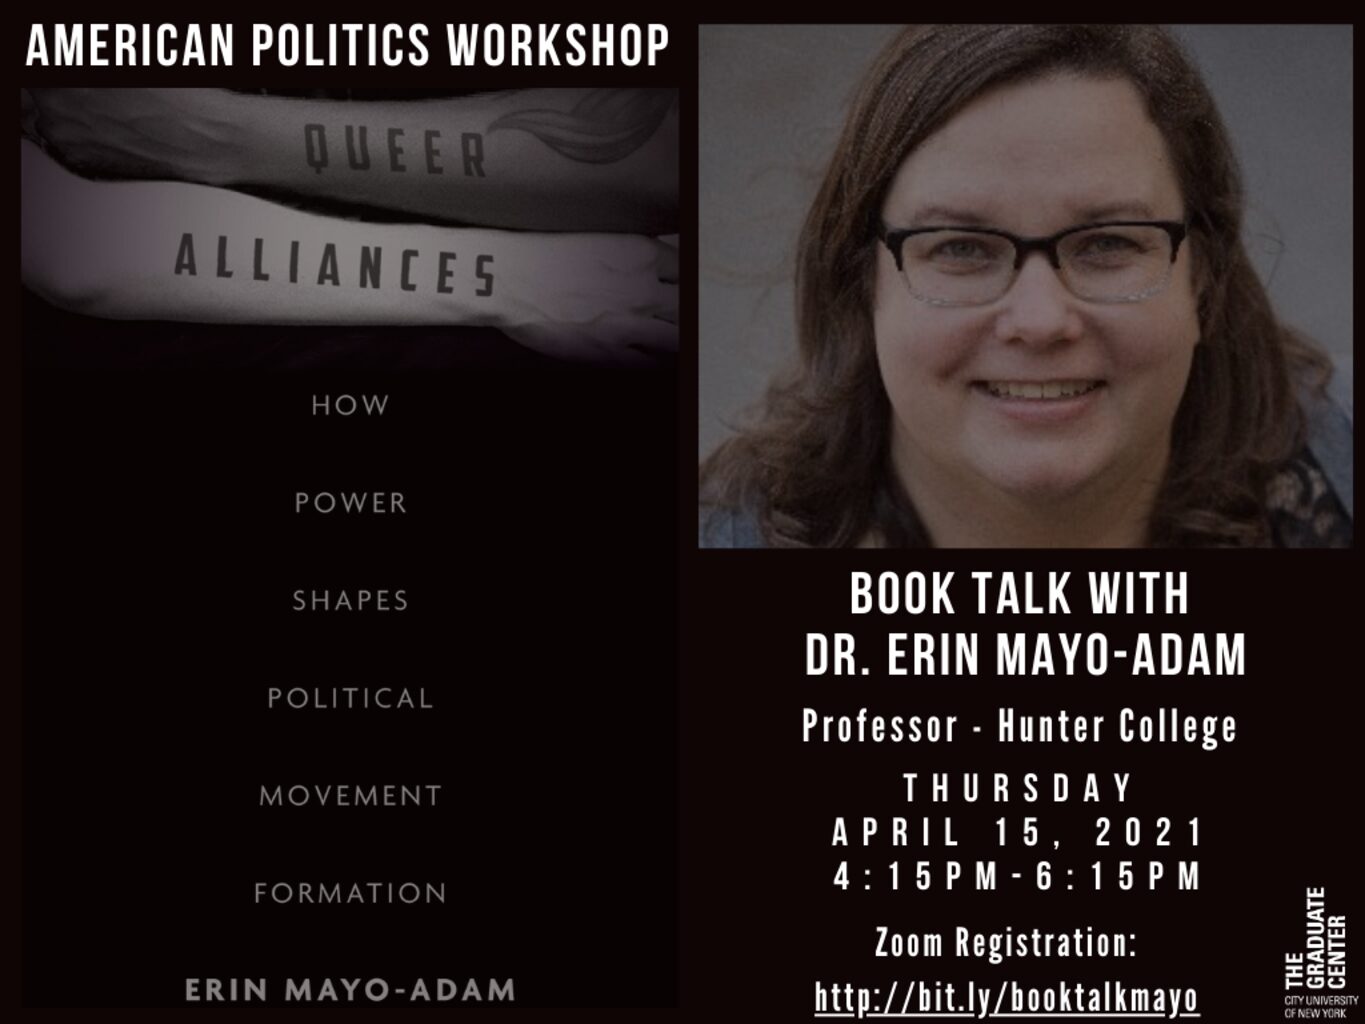 American Politics Workshop: Erin Mayo-Adam, "Queer Alliances – How Power Shapes Political Movement Formation," Thursday, April 15, 4:30-6:30pm